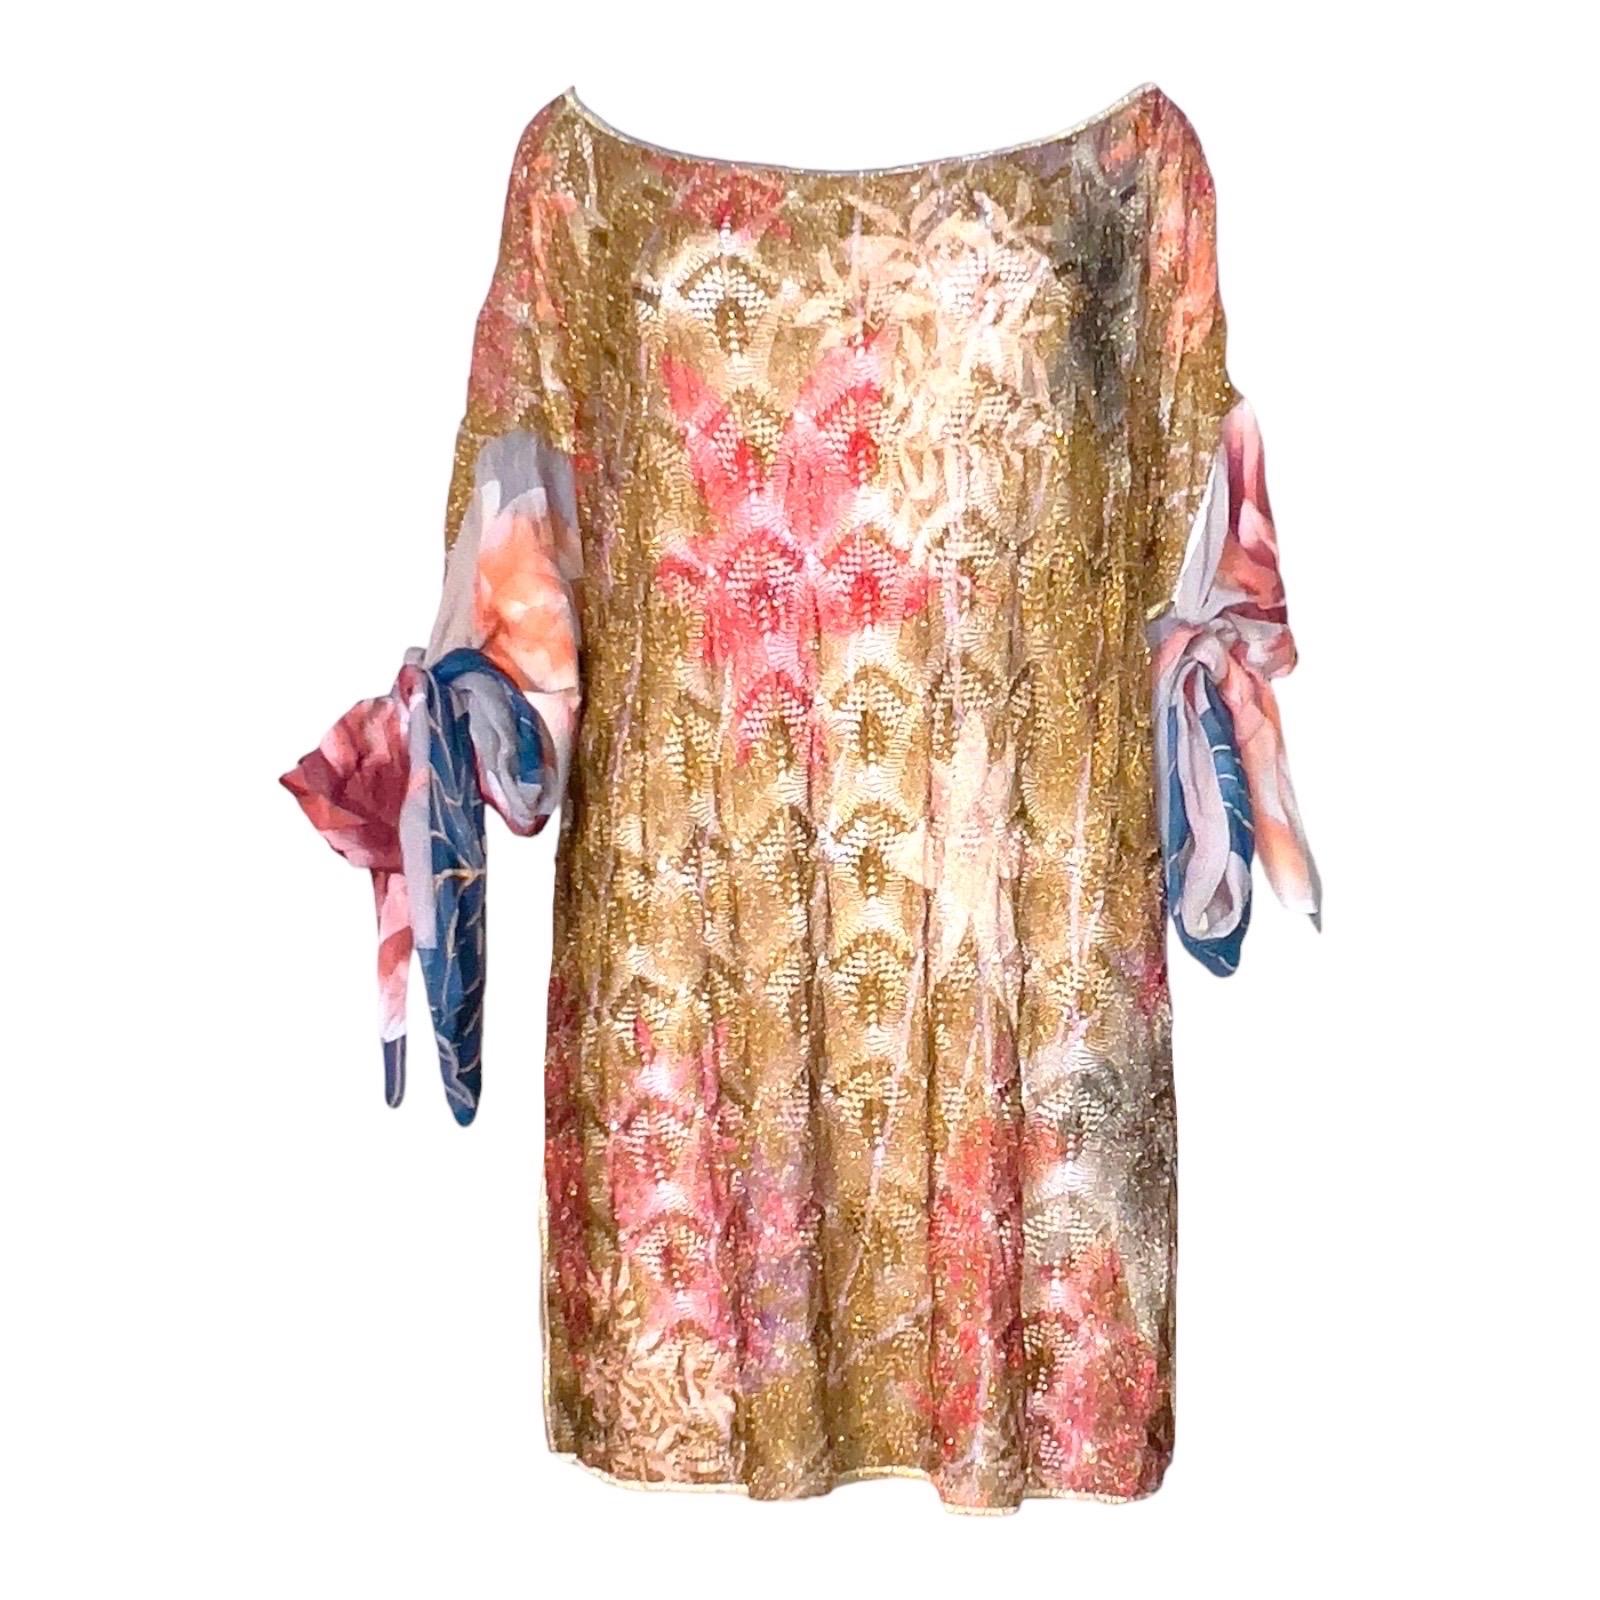 UNWORN Missoni Gold Metallic Crochet Knit Floral Kaftan Tunic Dress Cover Up M In Good Condition For Sale In Switzerland, CH